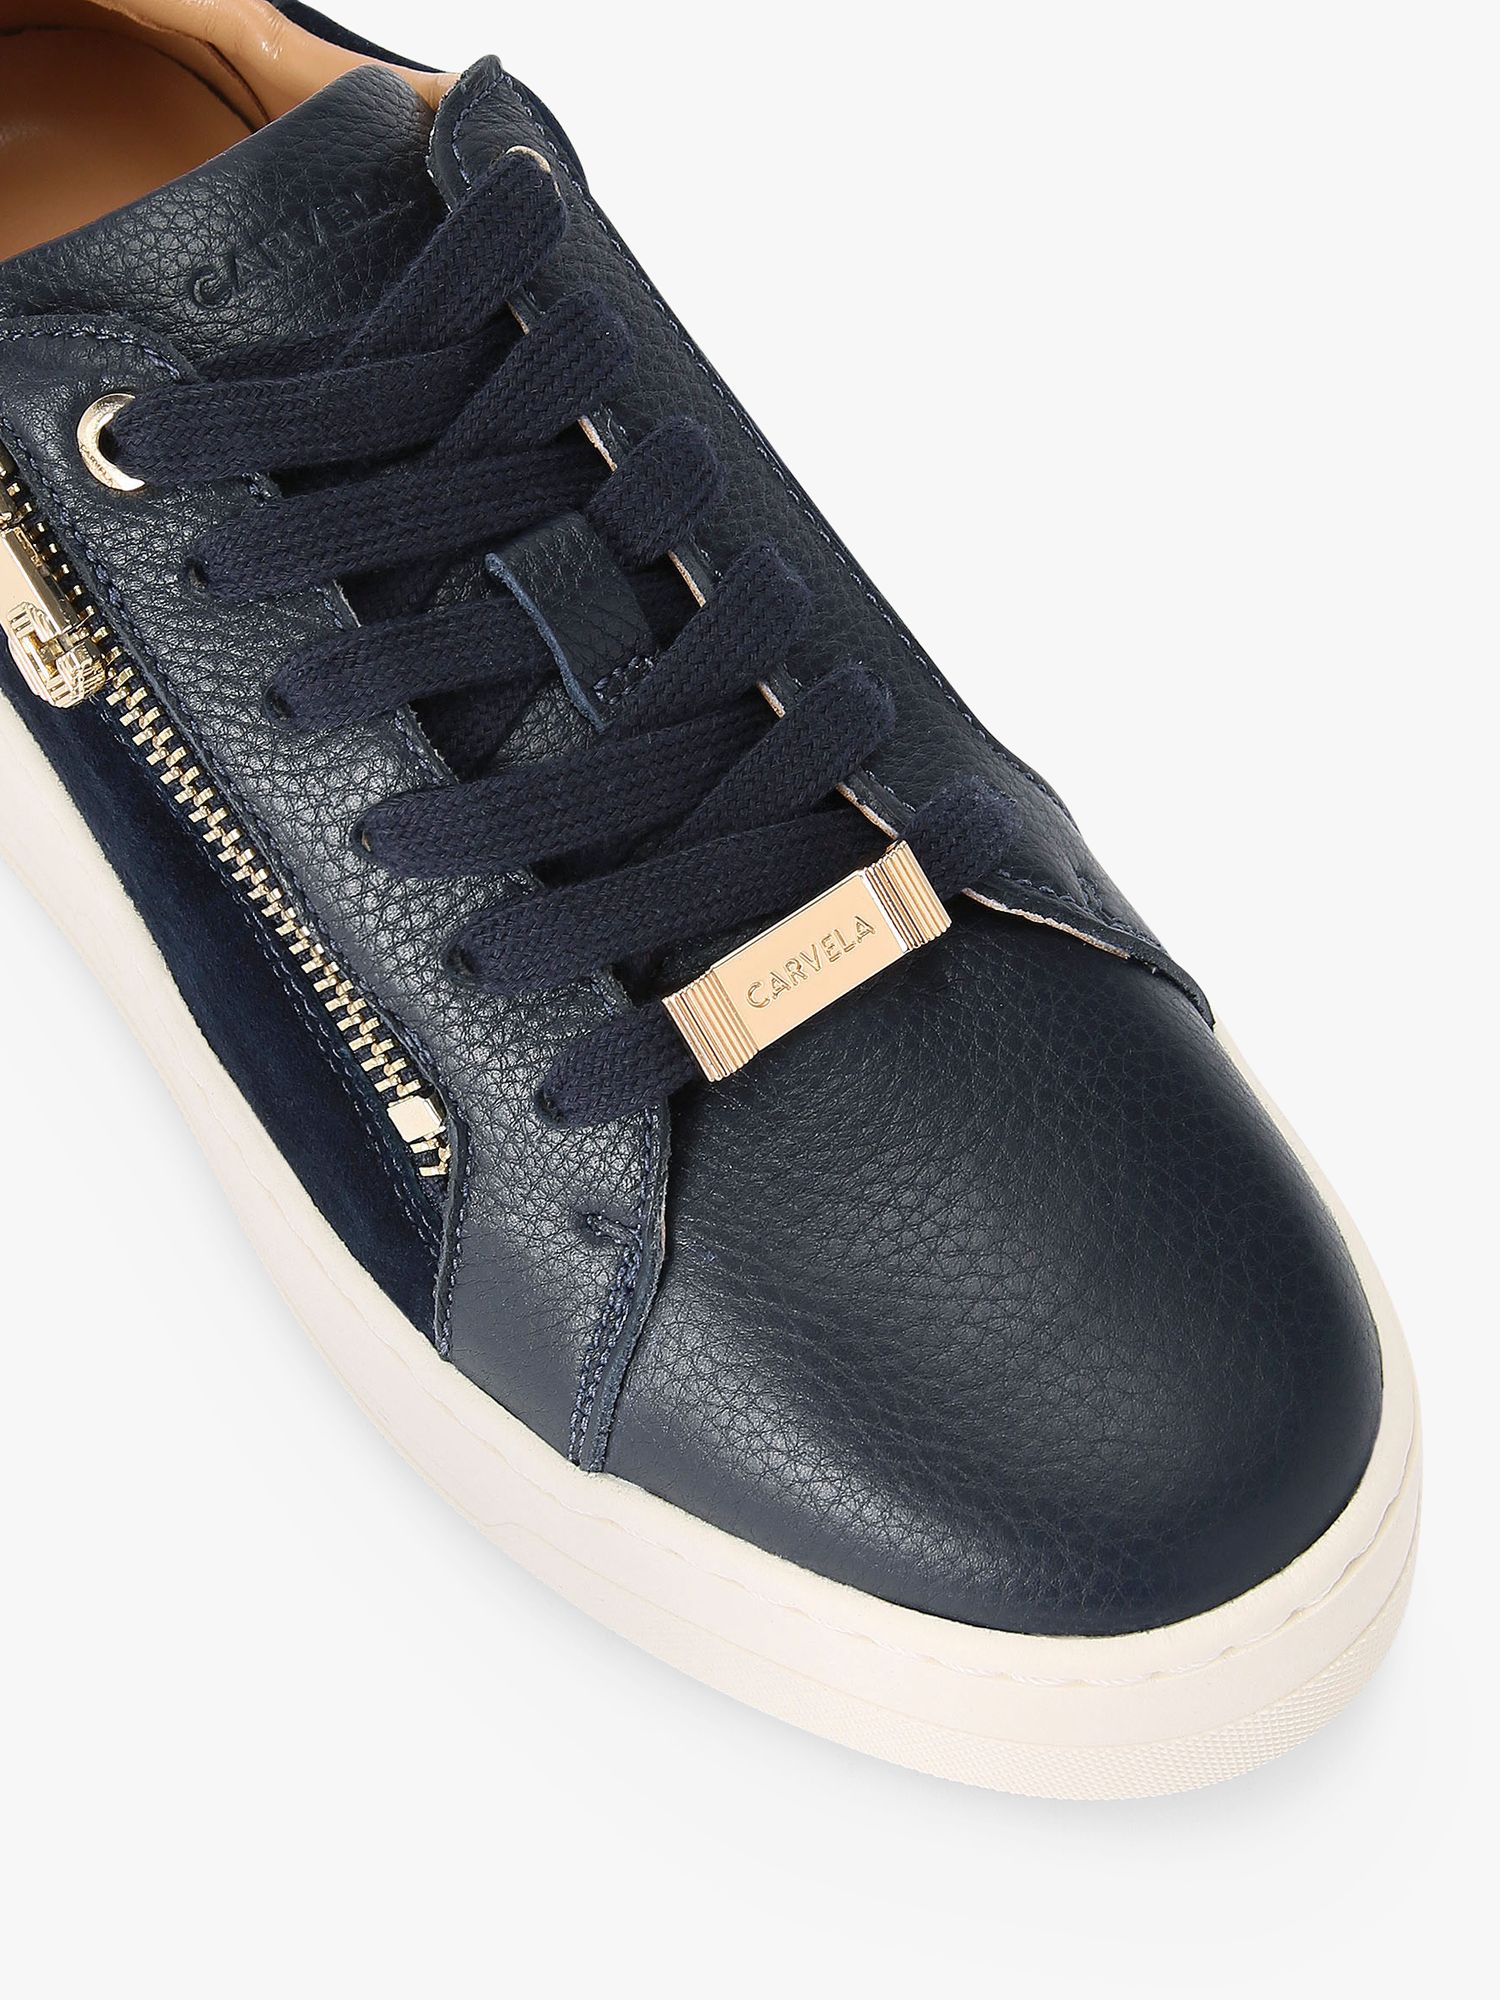 Carvela Connected Leather Zip Chunky Trainers, Blue Navy at John Lewis ...